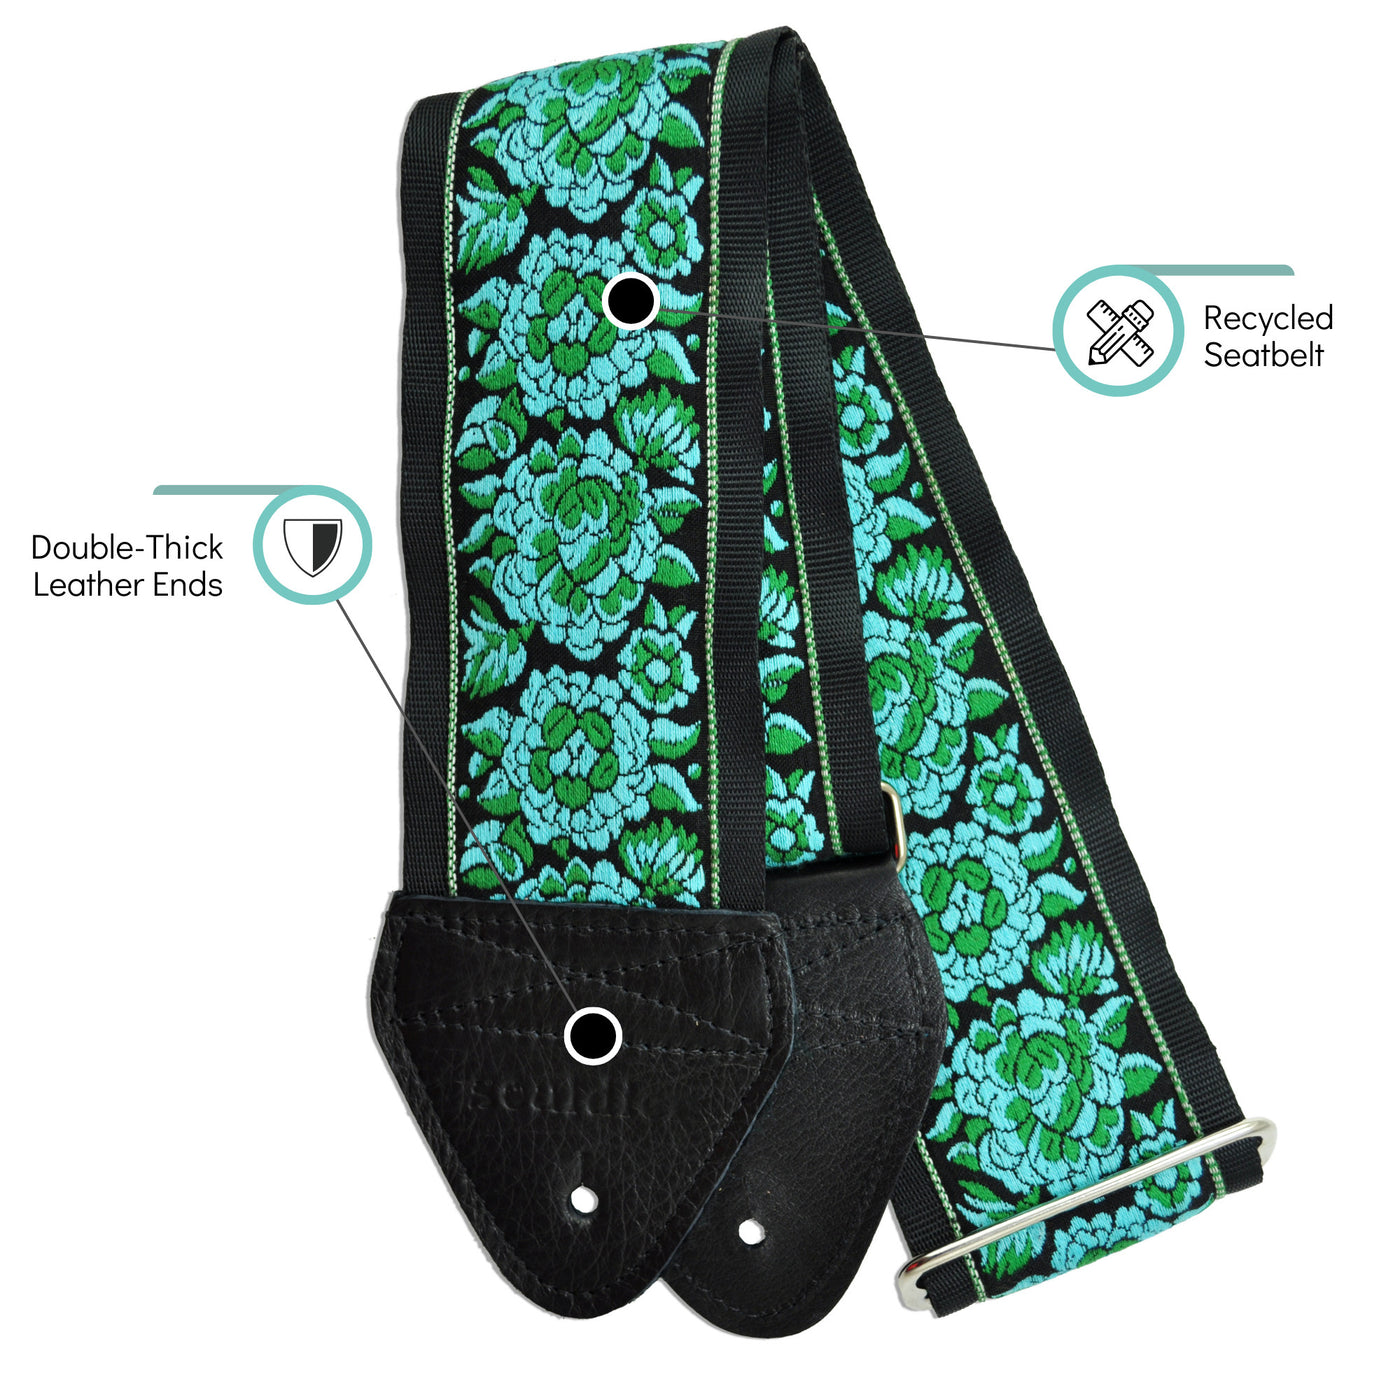 Souldier GT0497BK02BK - Handmade Souldier Fabric Bass Strap, 3 Inches Wide and Adjustable from 33" to 60" Made in the USA, Teal